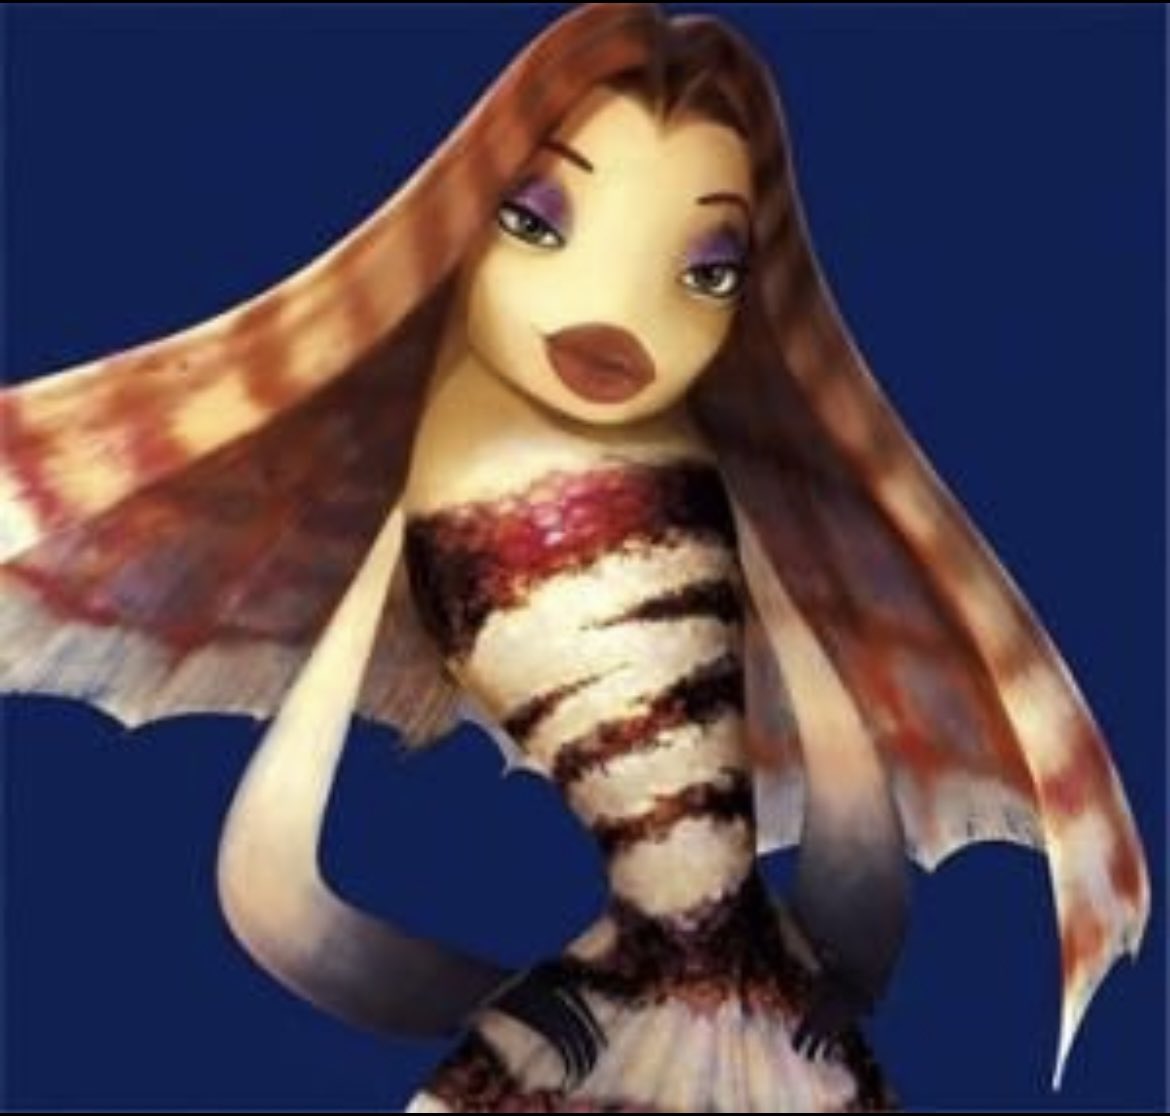 Shark Tale is our Passion on X: I'm only attracted to women who